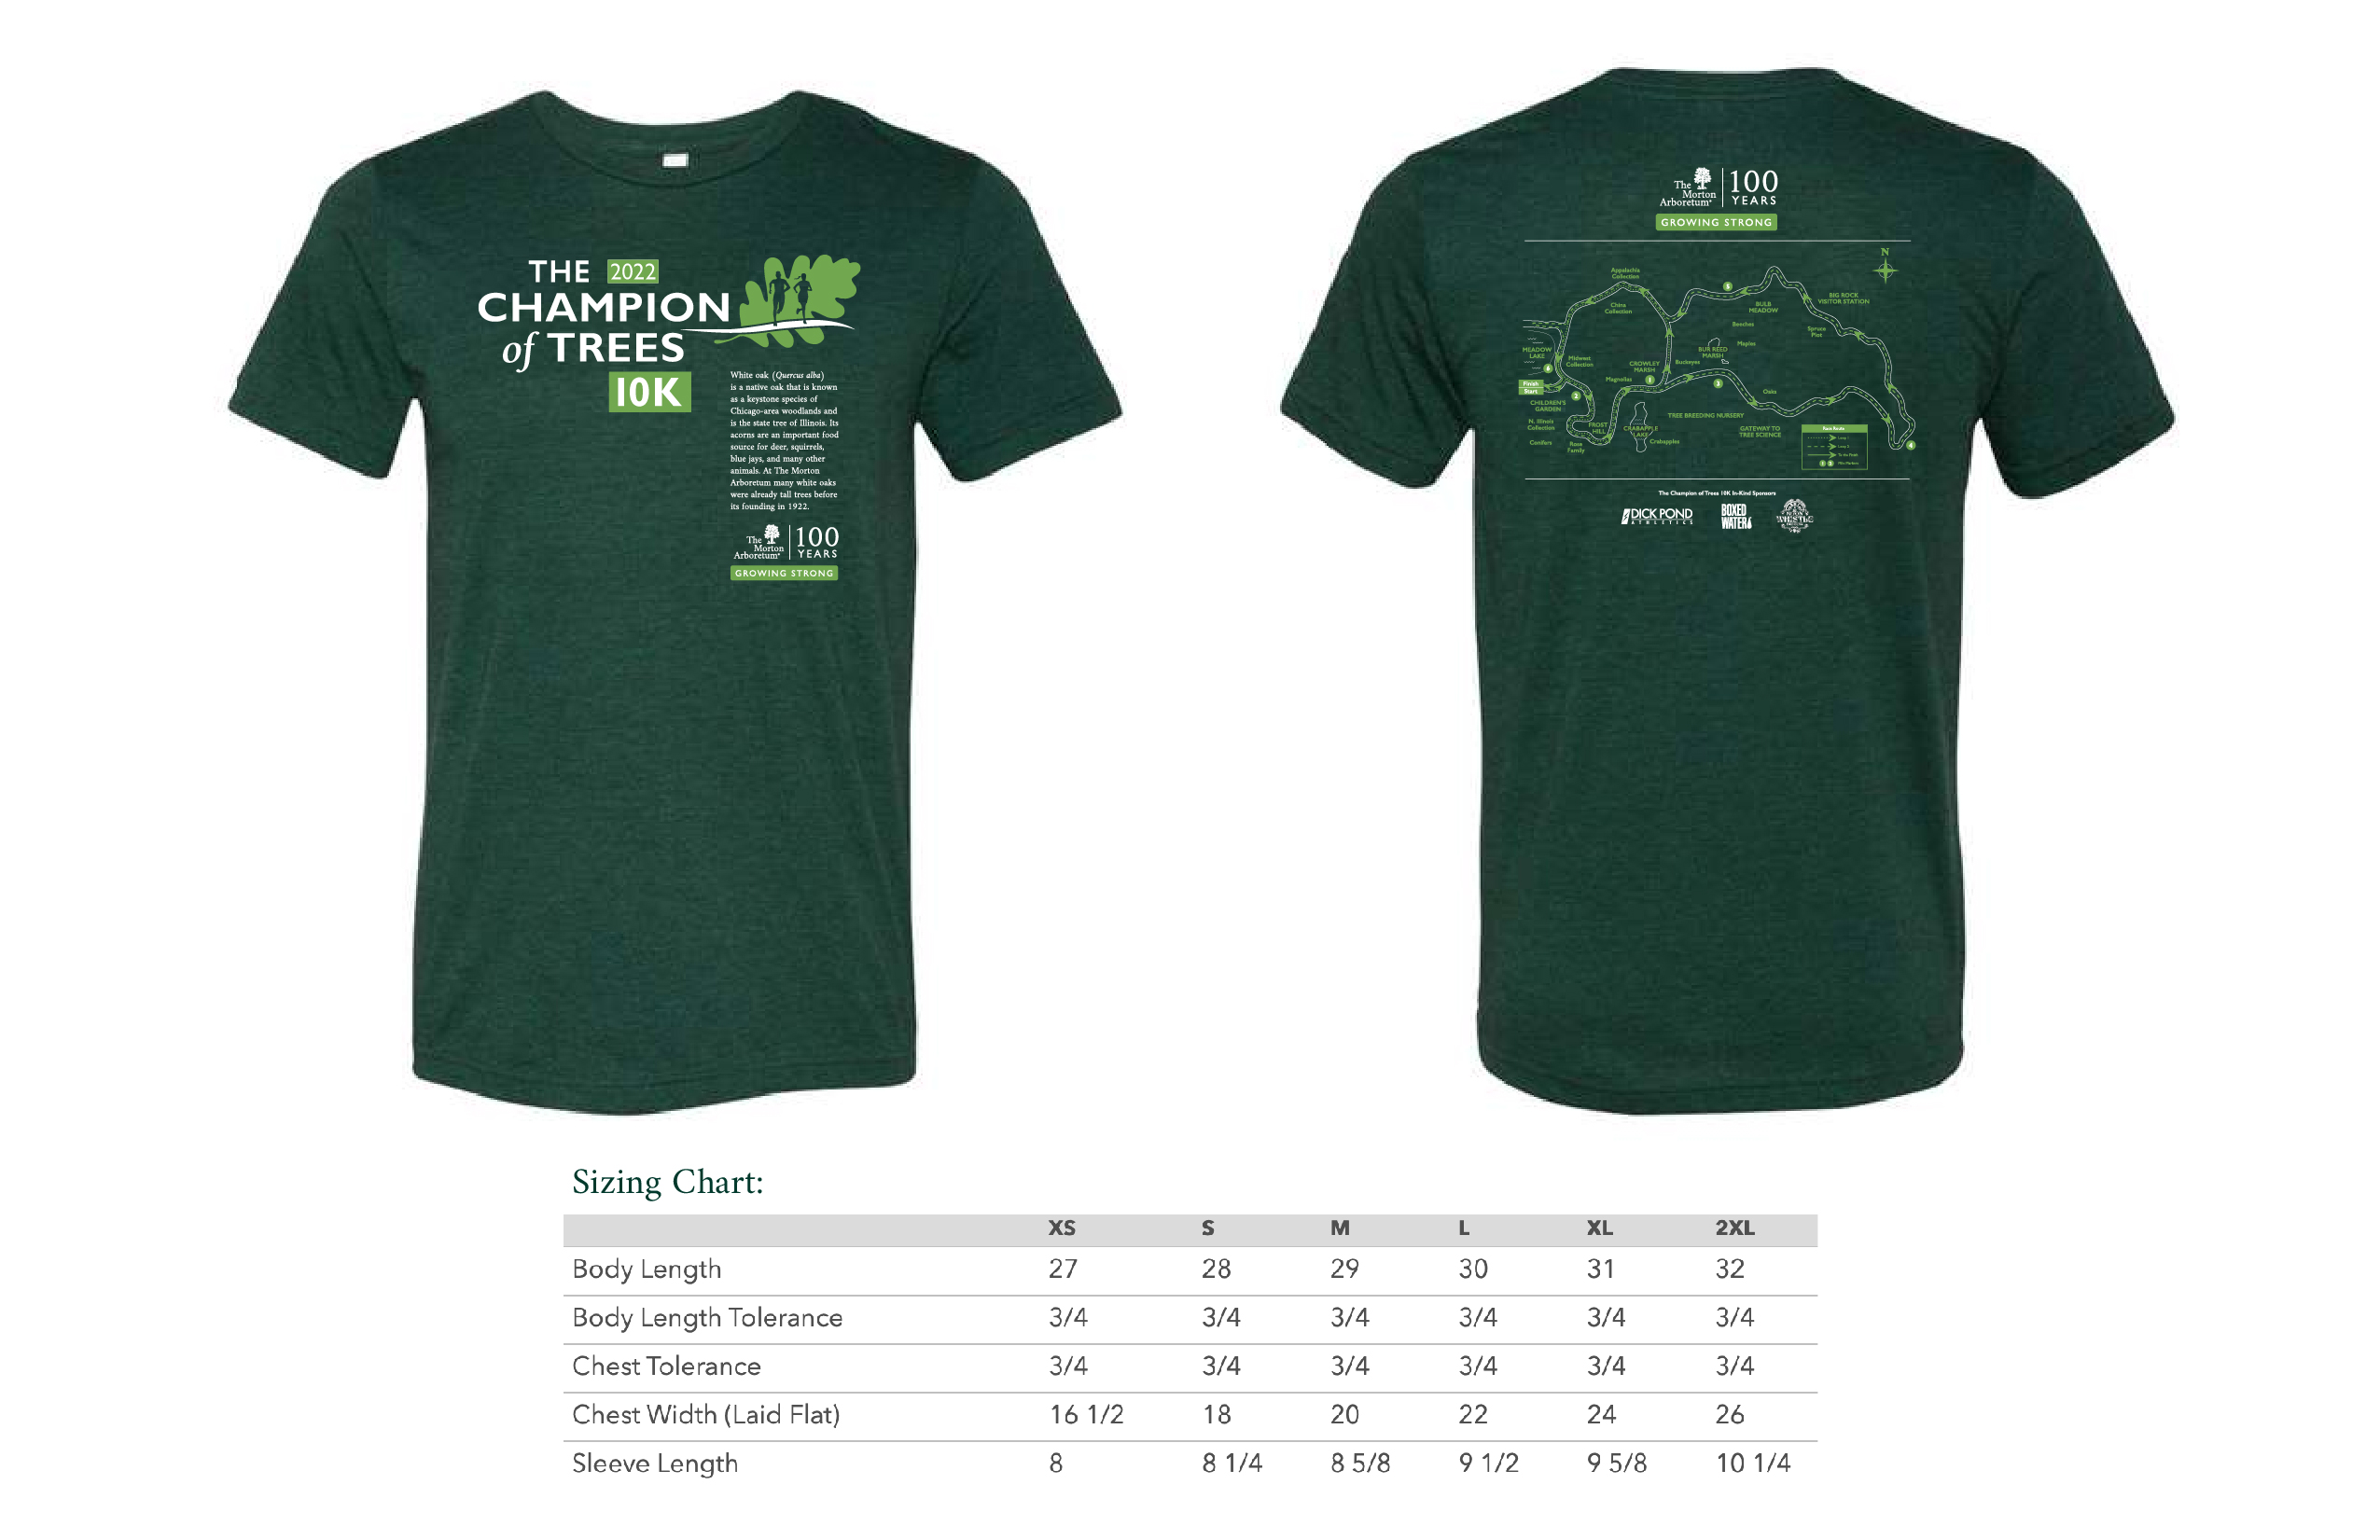 Champion of Trees 10K T-Shirt design and sizing chart